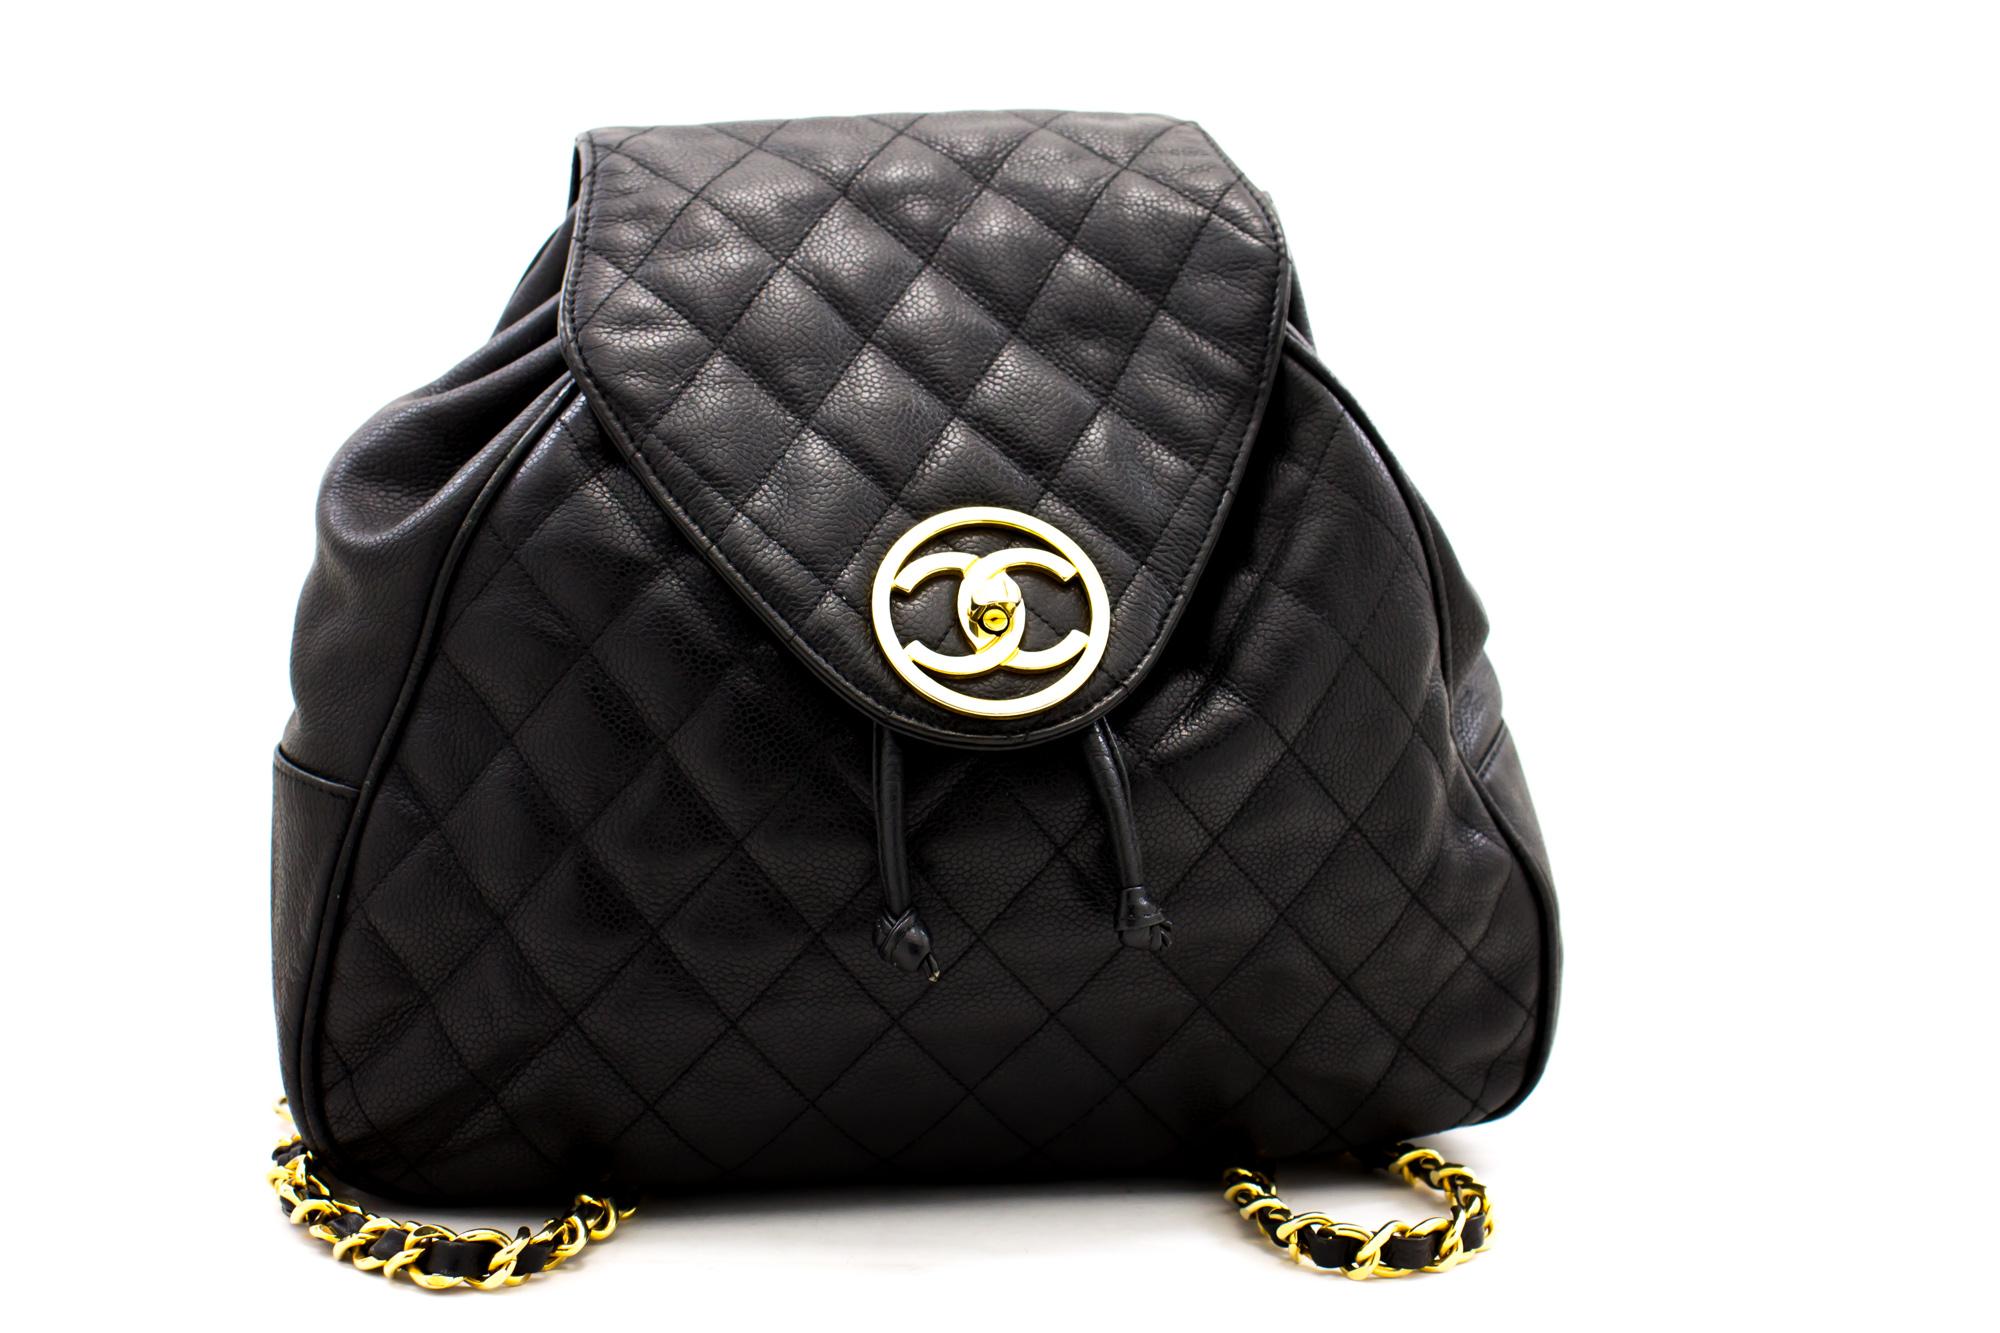 An authentic CHANEL Caviar Backpack Chain Bag Black Leather Flap Gold Hardware. The color is Black. The outside material is Leather. The pattern is Solid. This item is Vintage / Classic. The year of manufacture would be 1989-1991.
Conditions &